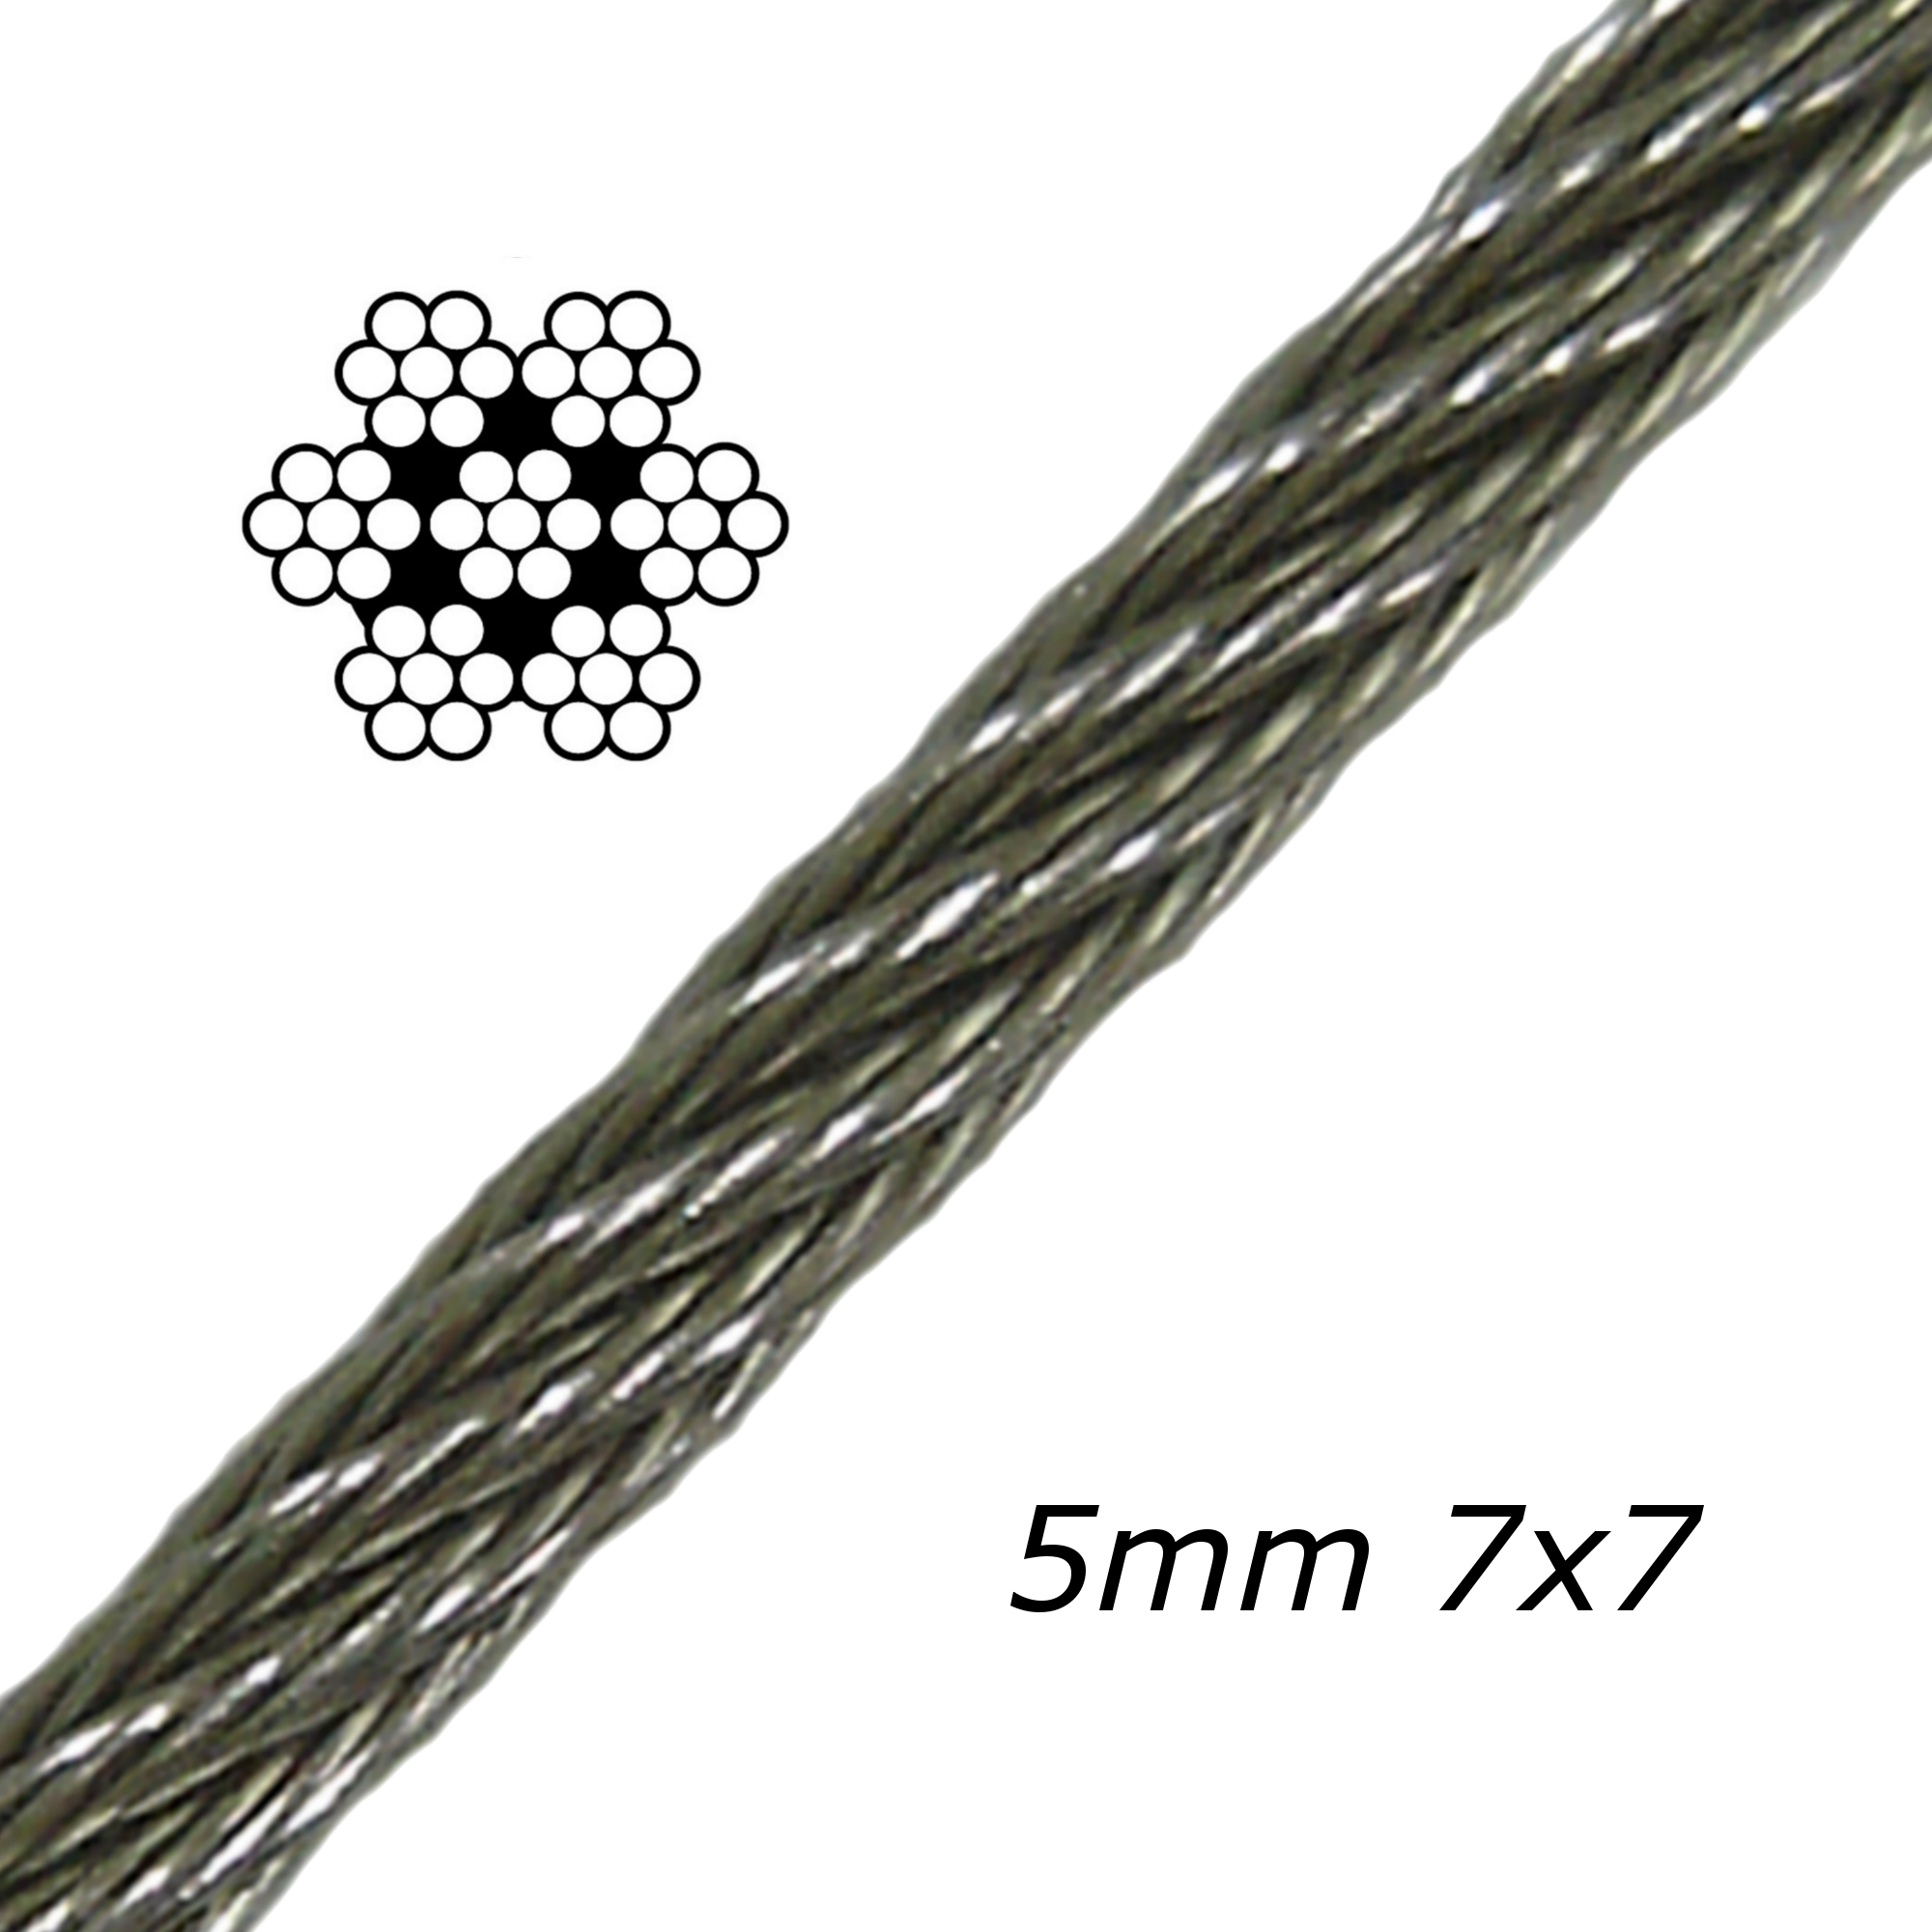 5mm 7x7 Stainless Steel Wire Rope